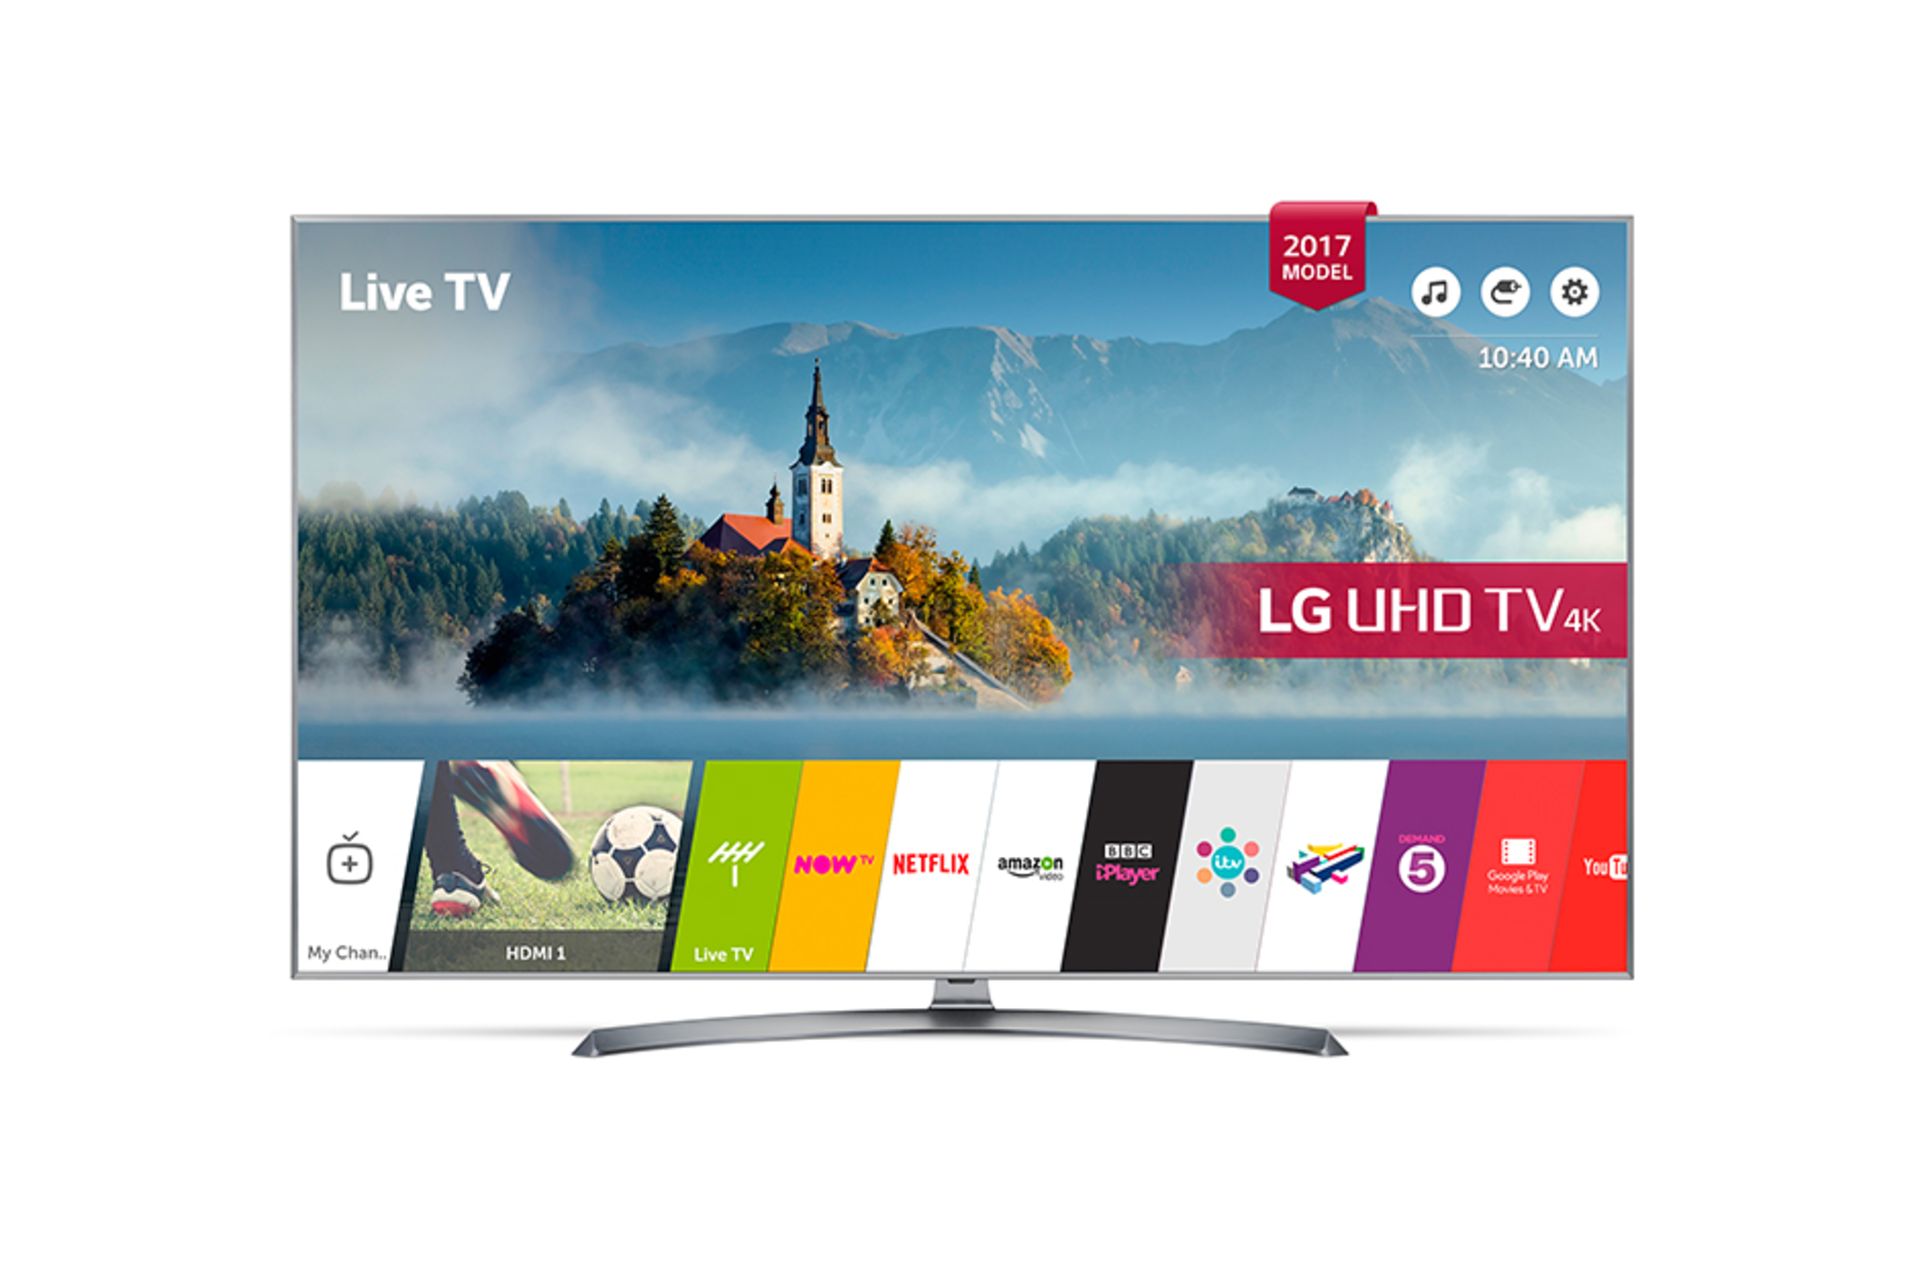 V Grade A LG 65 Inch ACTIVE HDR 4K ULTRA HD LED SMART TV WITH FREEVIEW HD & WEBOS 3.0 & WIFI - ULTRA